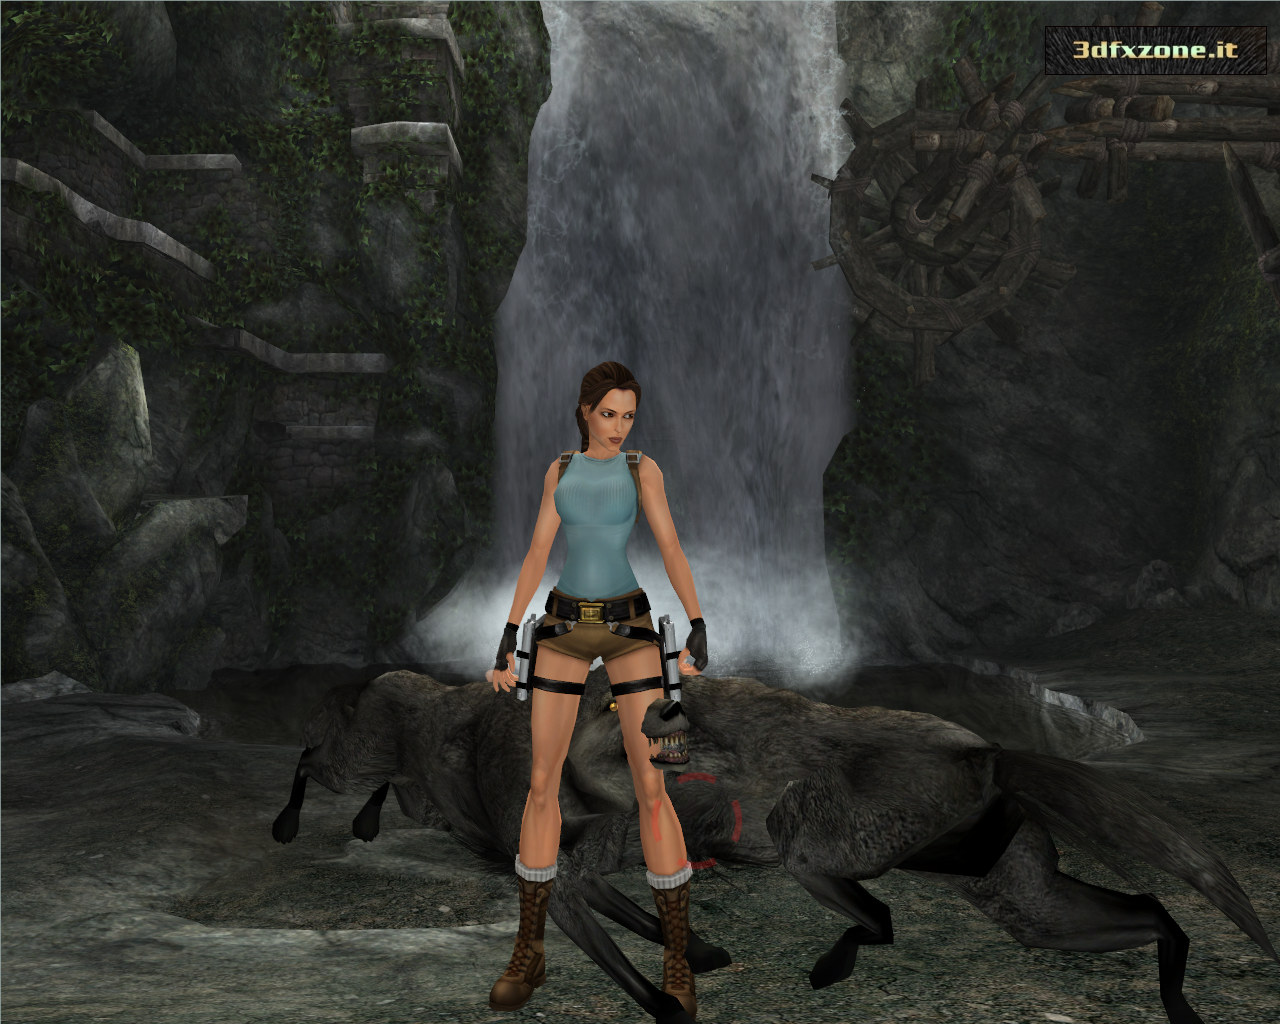 Media asset in full size related to 3dfxzone.it news item entitled as follows: Screenshots e demo di Tomb Raider: Anniversary | Image Name: news5096_4.jpg